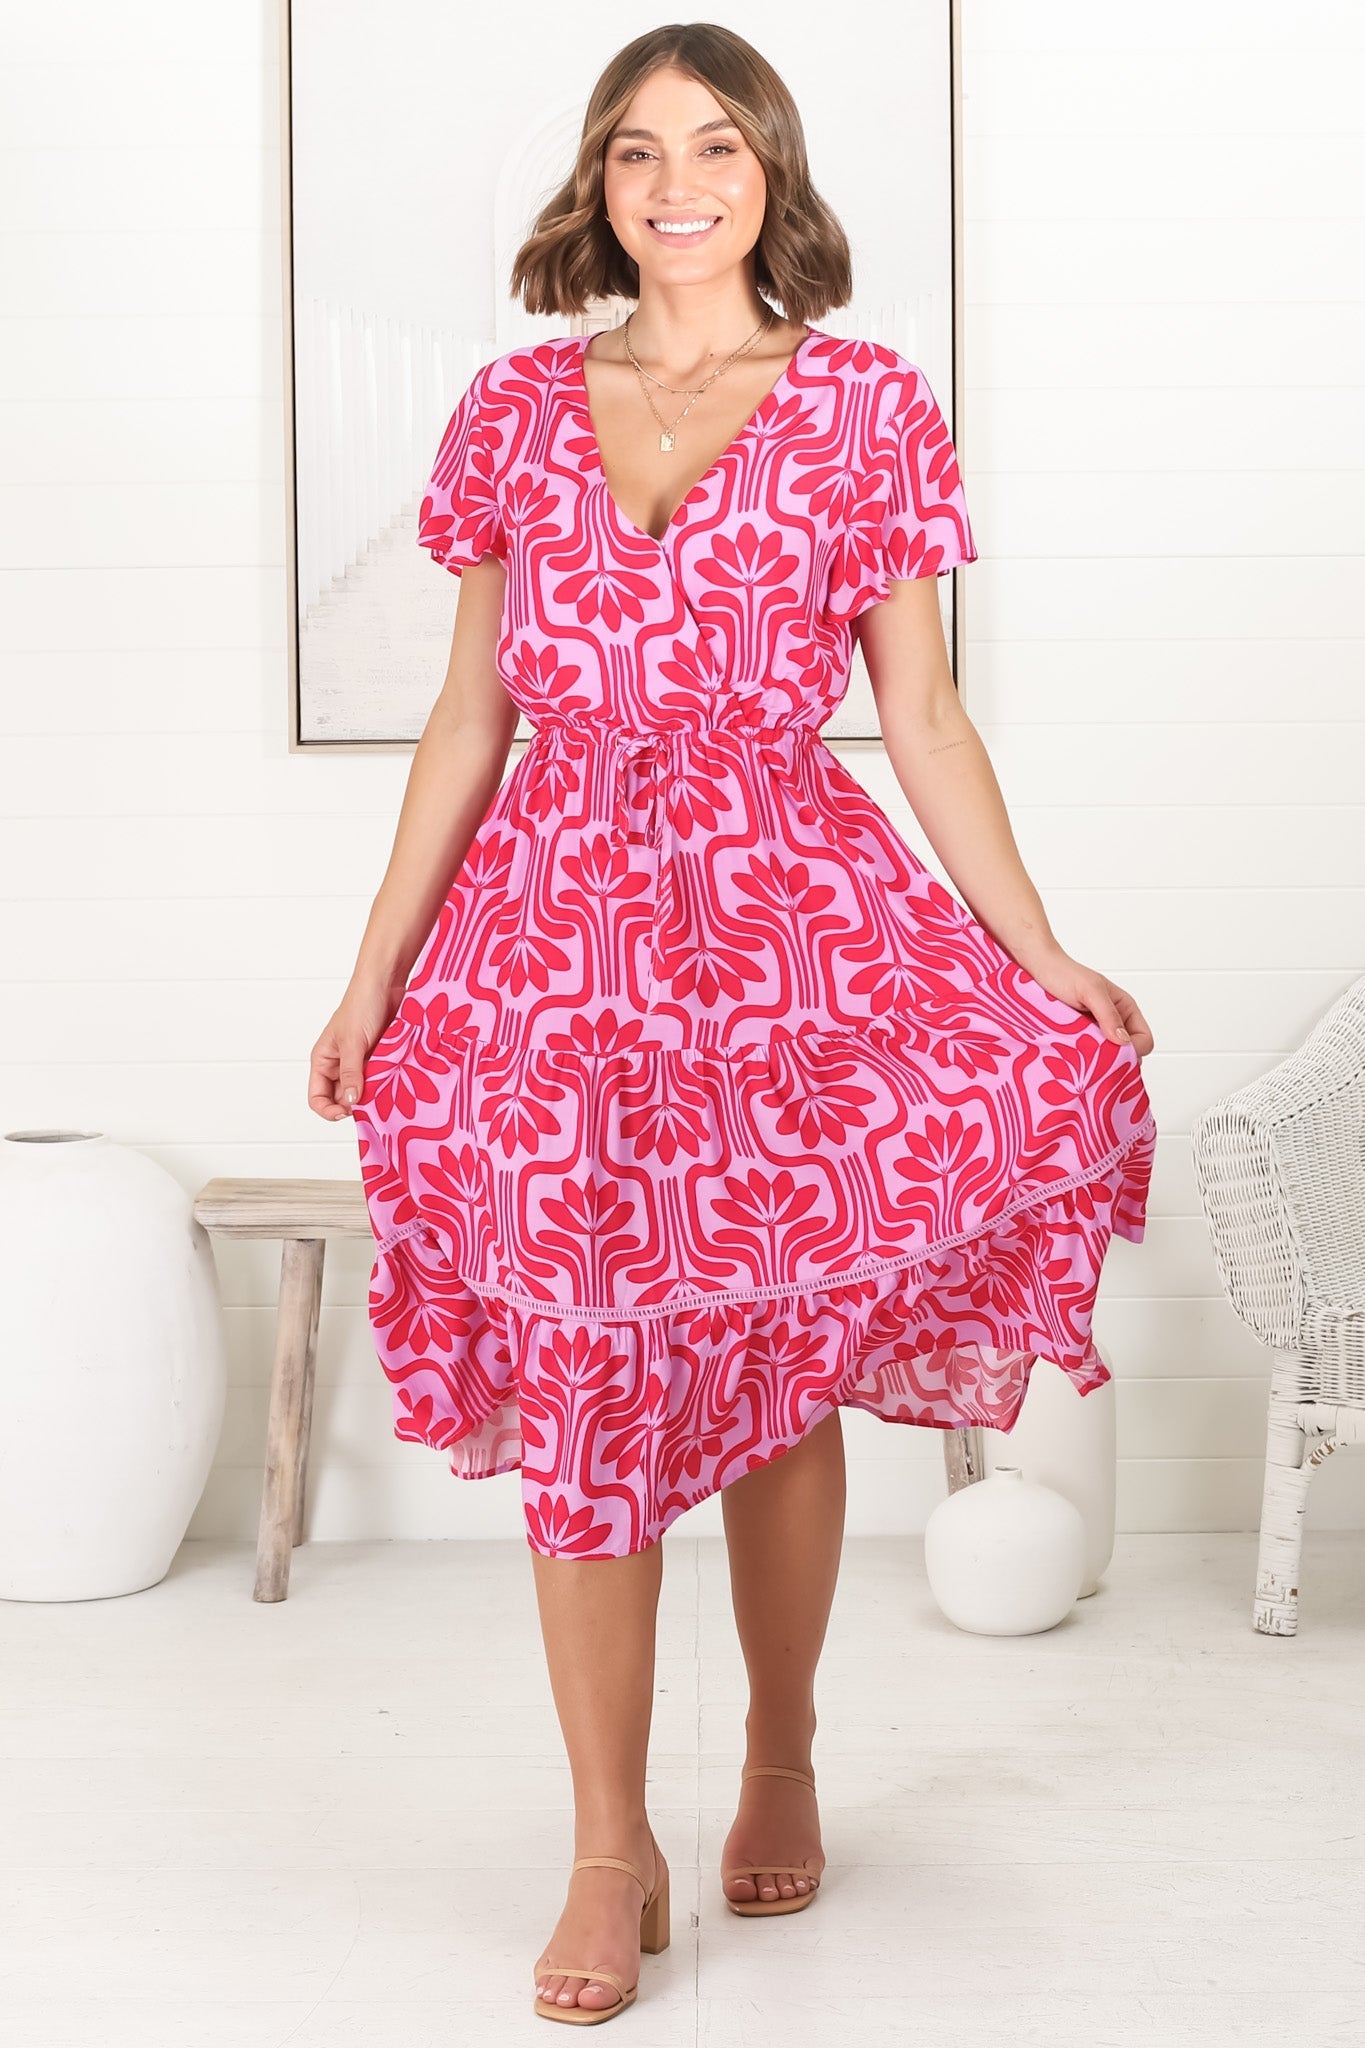 Kris Midi Dress - Cross Bodice A Line Dress with Crochet Spilicing in Luvira Print Pink